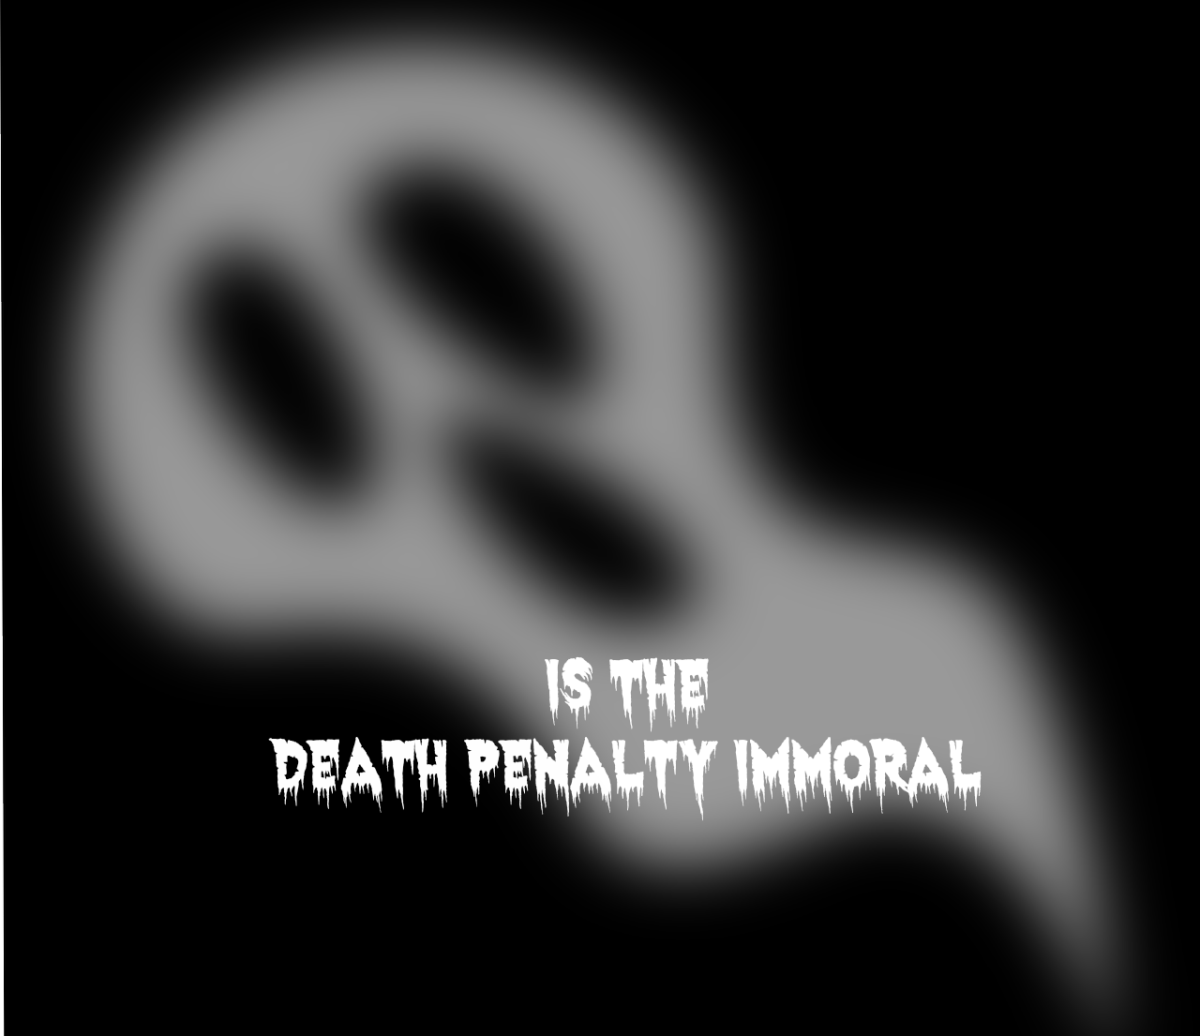 Thou Shall Not Kill: The Immorality of the Death Penalty